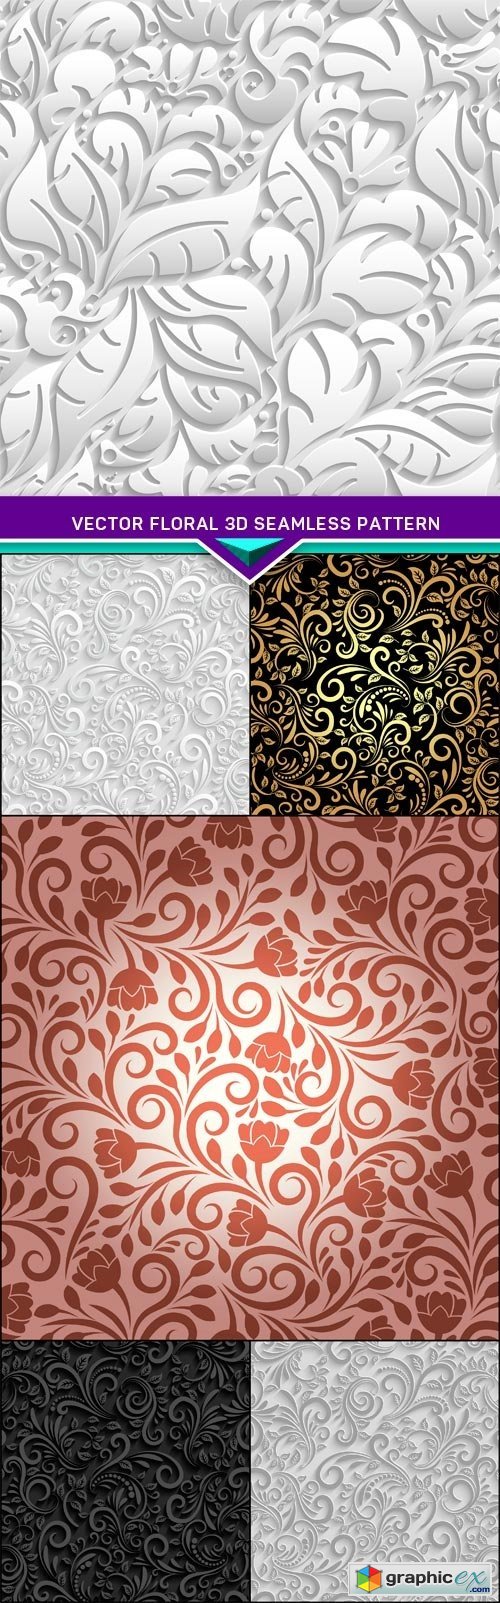 Vector floral 3d seamless pattern with shadow 6X EPS